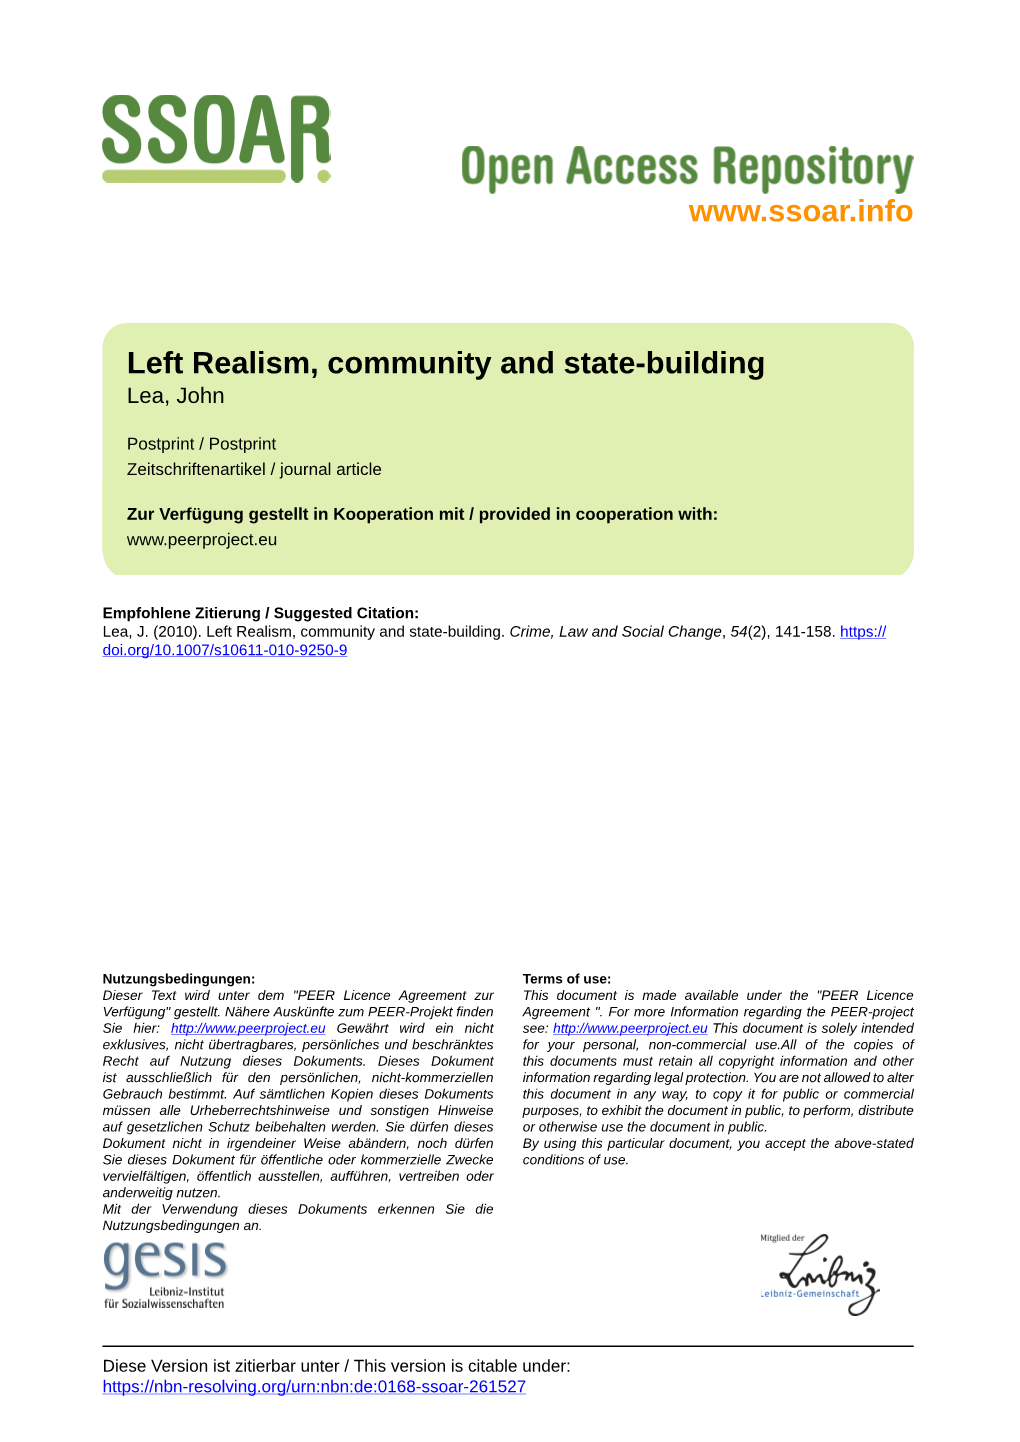 Left Realism, Community and State-Building Lea, John